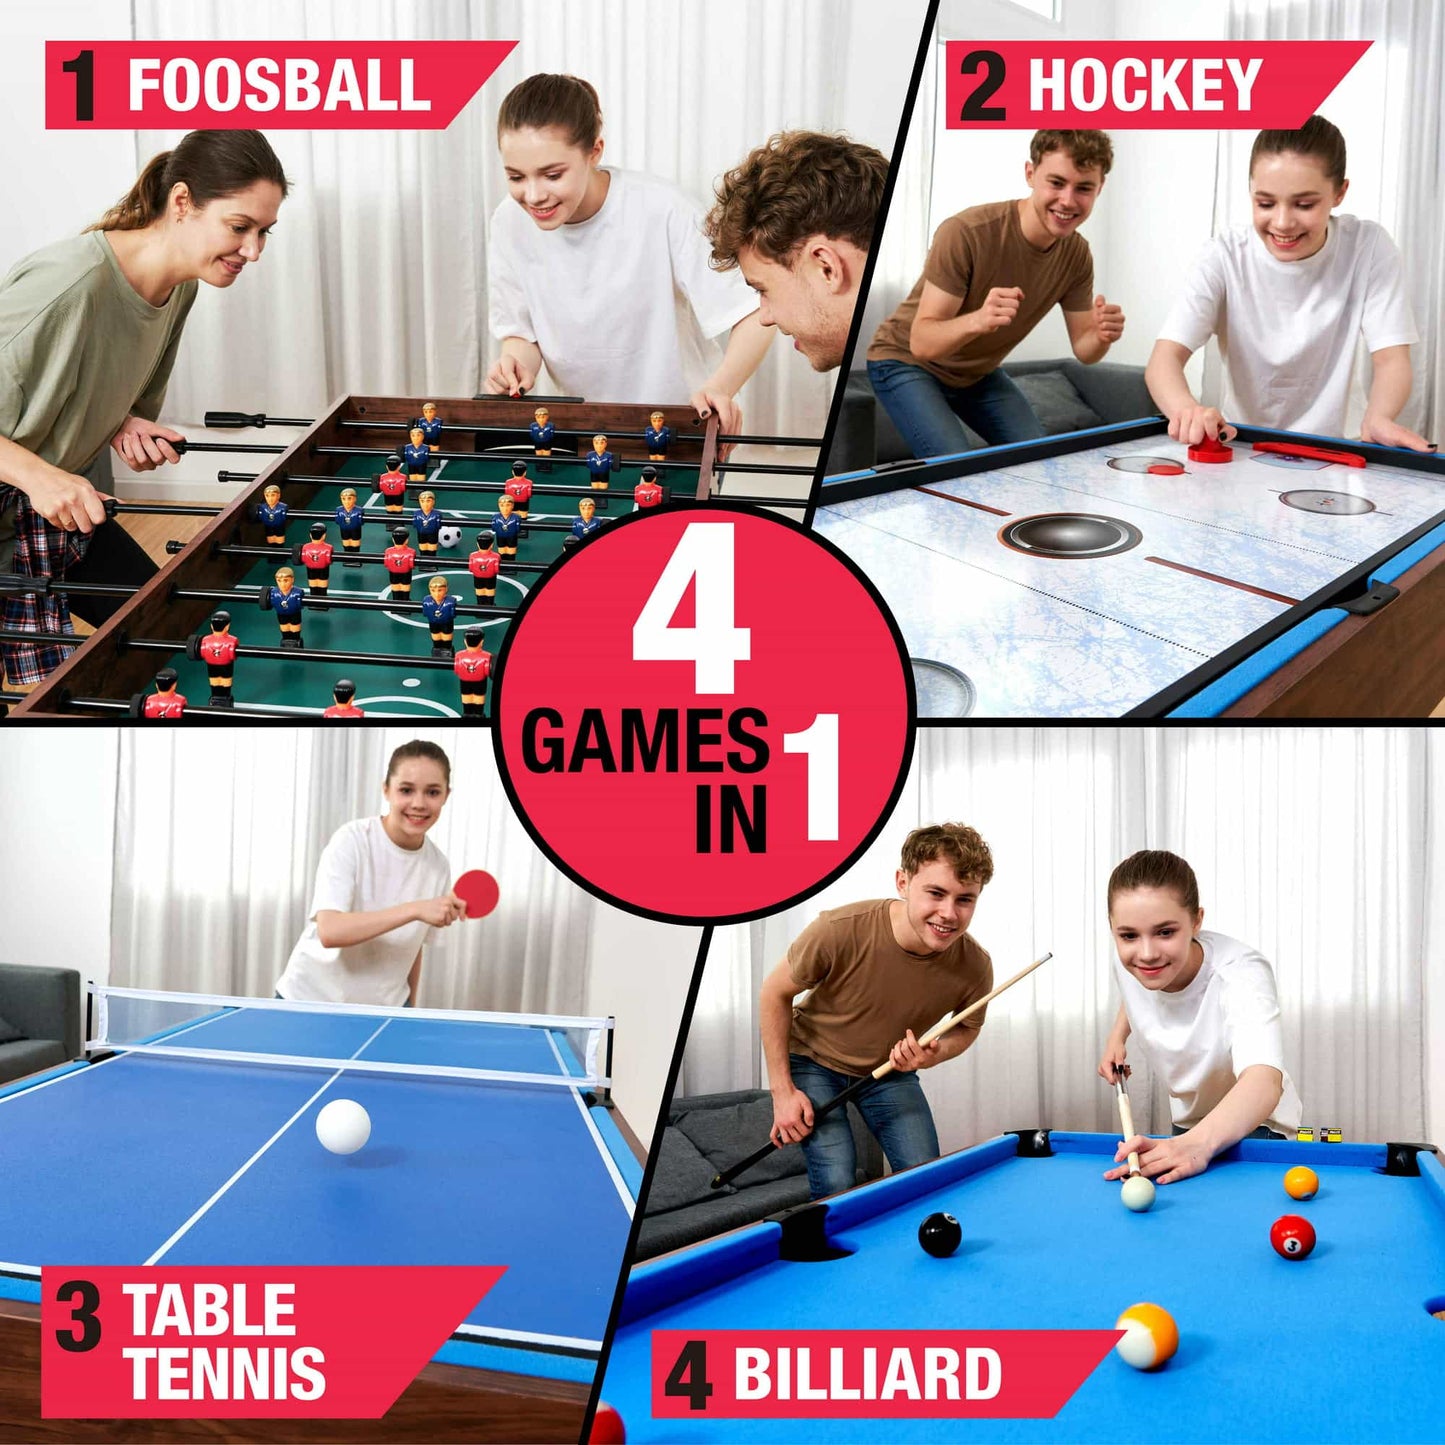 Buy MD Sports 54" 4-in-1 Combo Game Table, Foosball, Hockey, Table Tennis, Billiards in USA